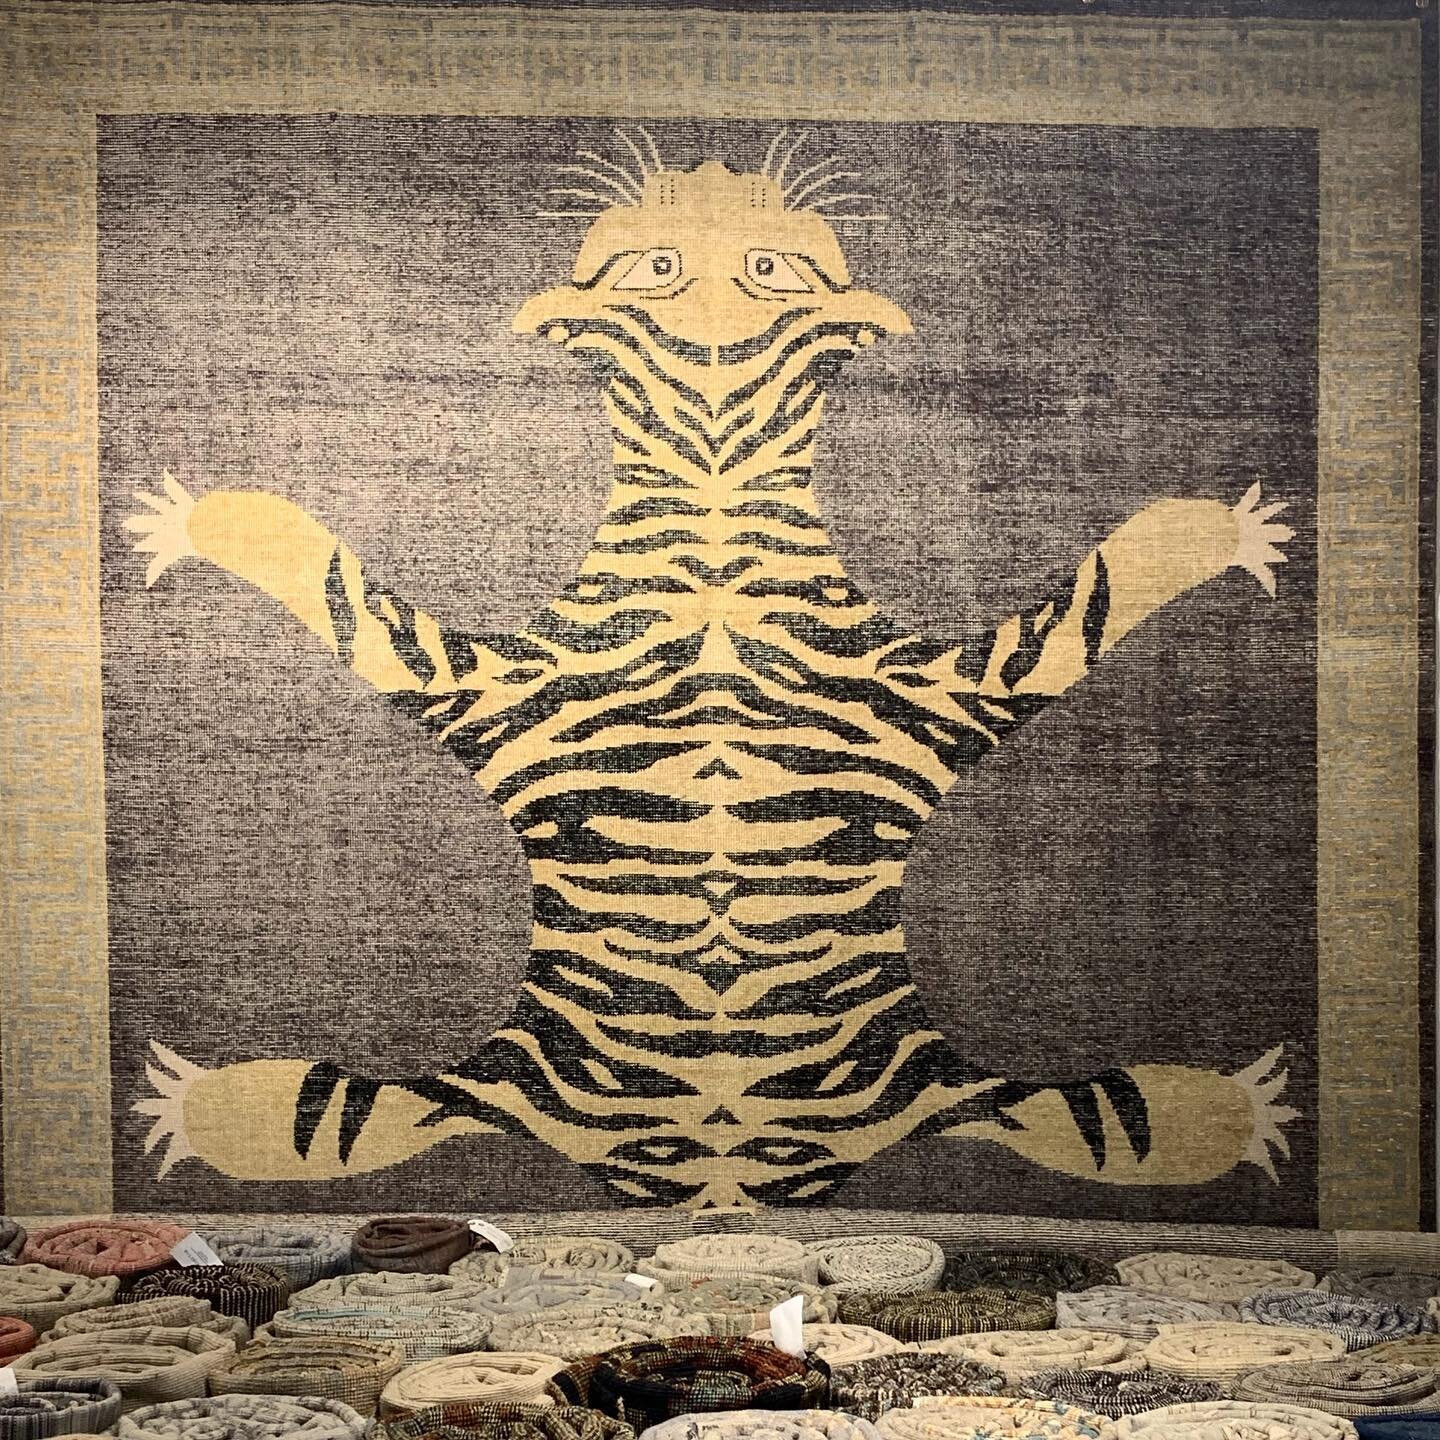 GET WILD with a tiger. Available in all standard sizes as well as a green ground colorway. #knotenvy #rug #tiger #moattarllc